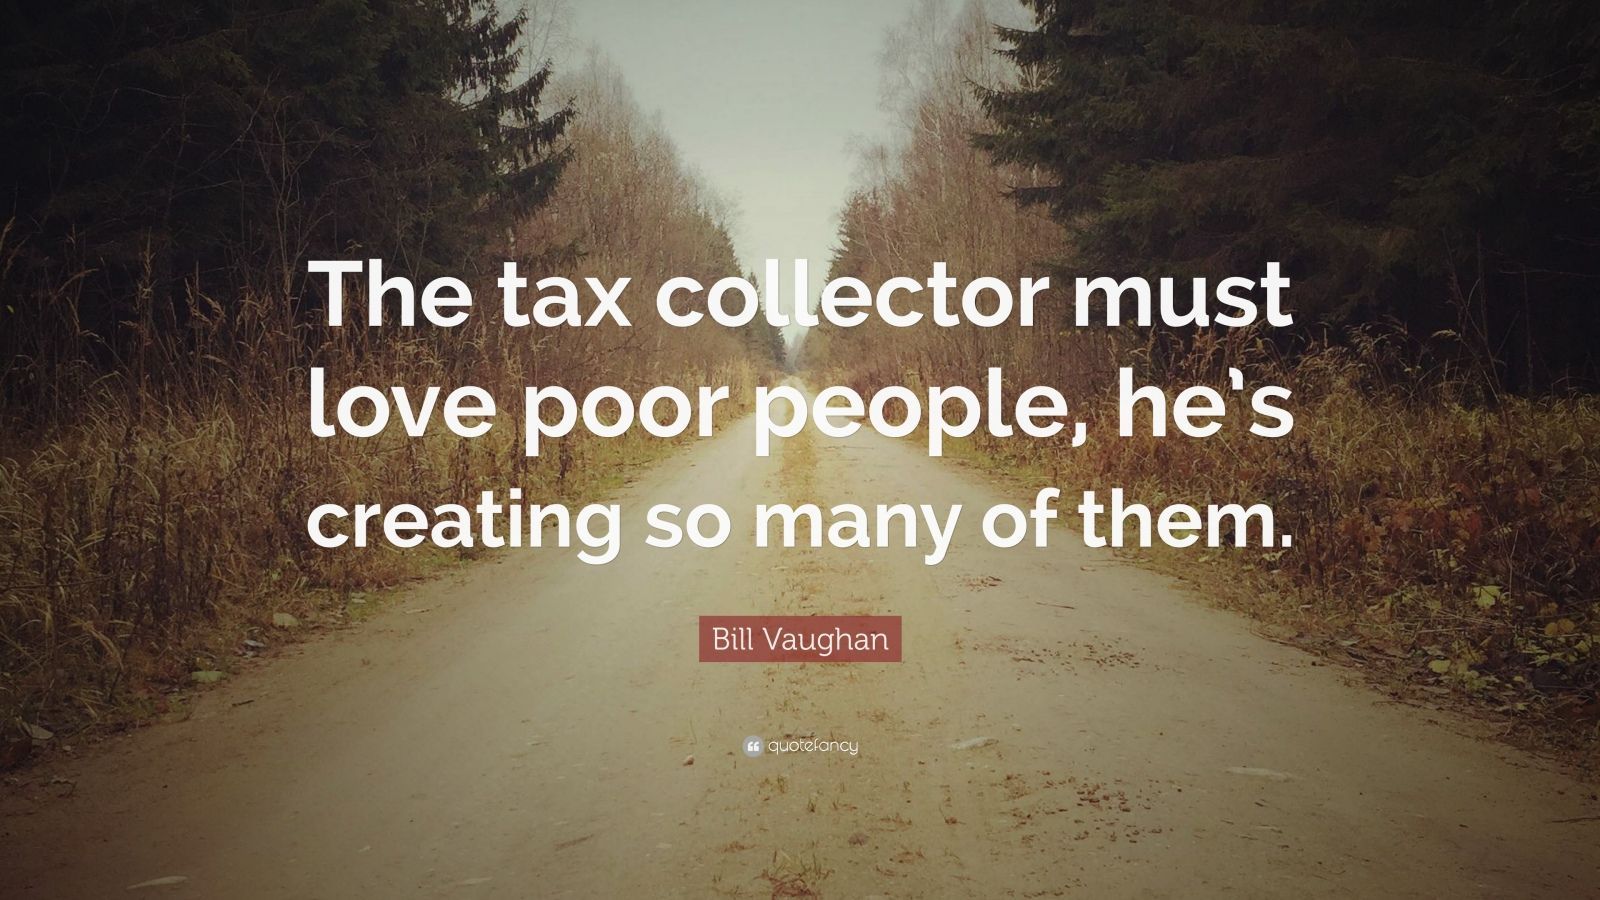 Bill Vaughan Quote: “The tax collector must love poor people, he's creating so many of them.” (7 wallpaper)